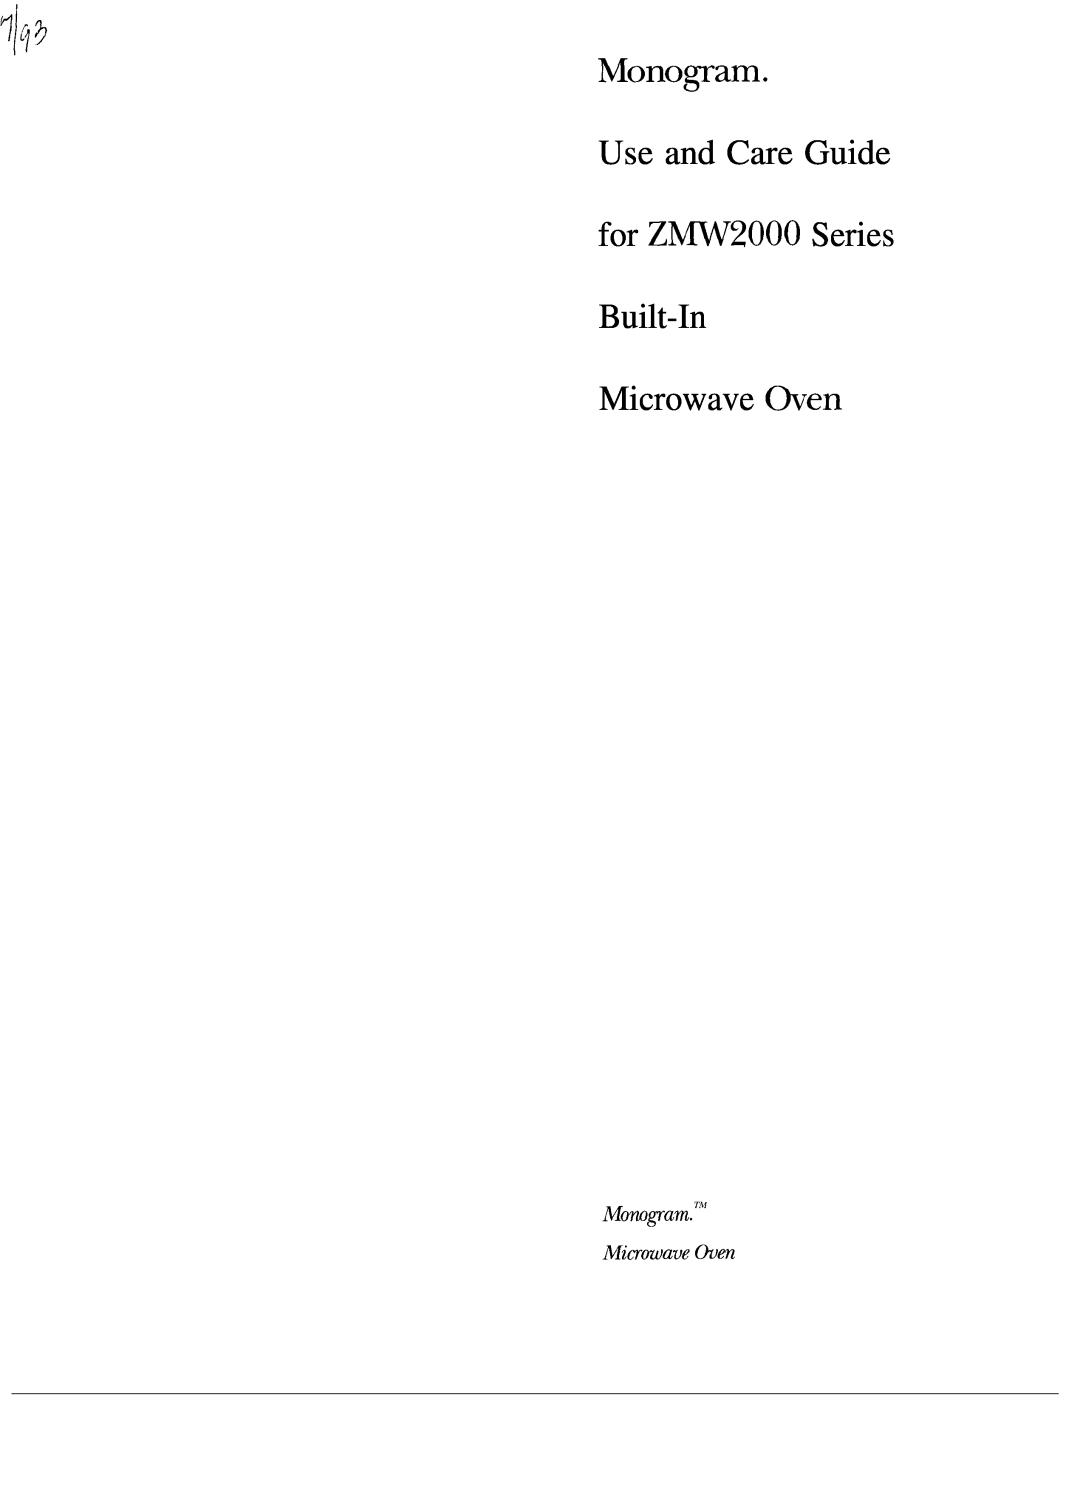 GE Monogram manual Mono~am Use and Care Guide for ZW2000 Series Built-In Microwave @en, Mowgam.TM, Mimowave tim 